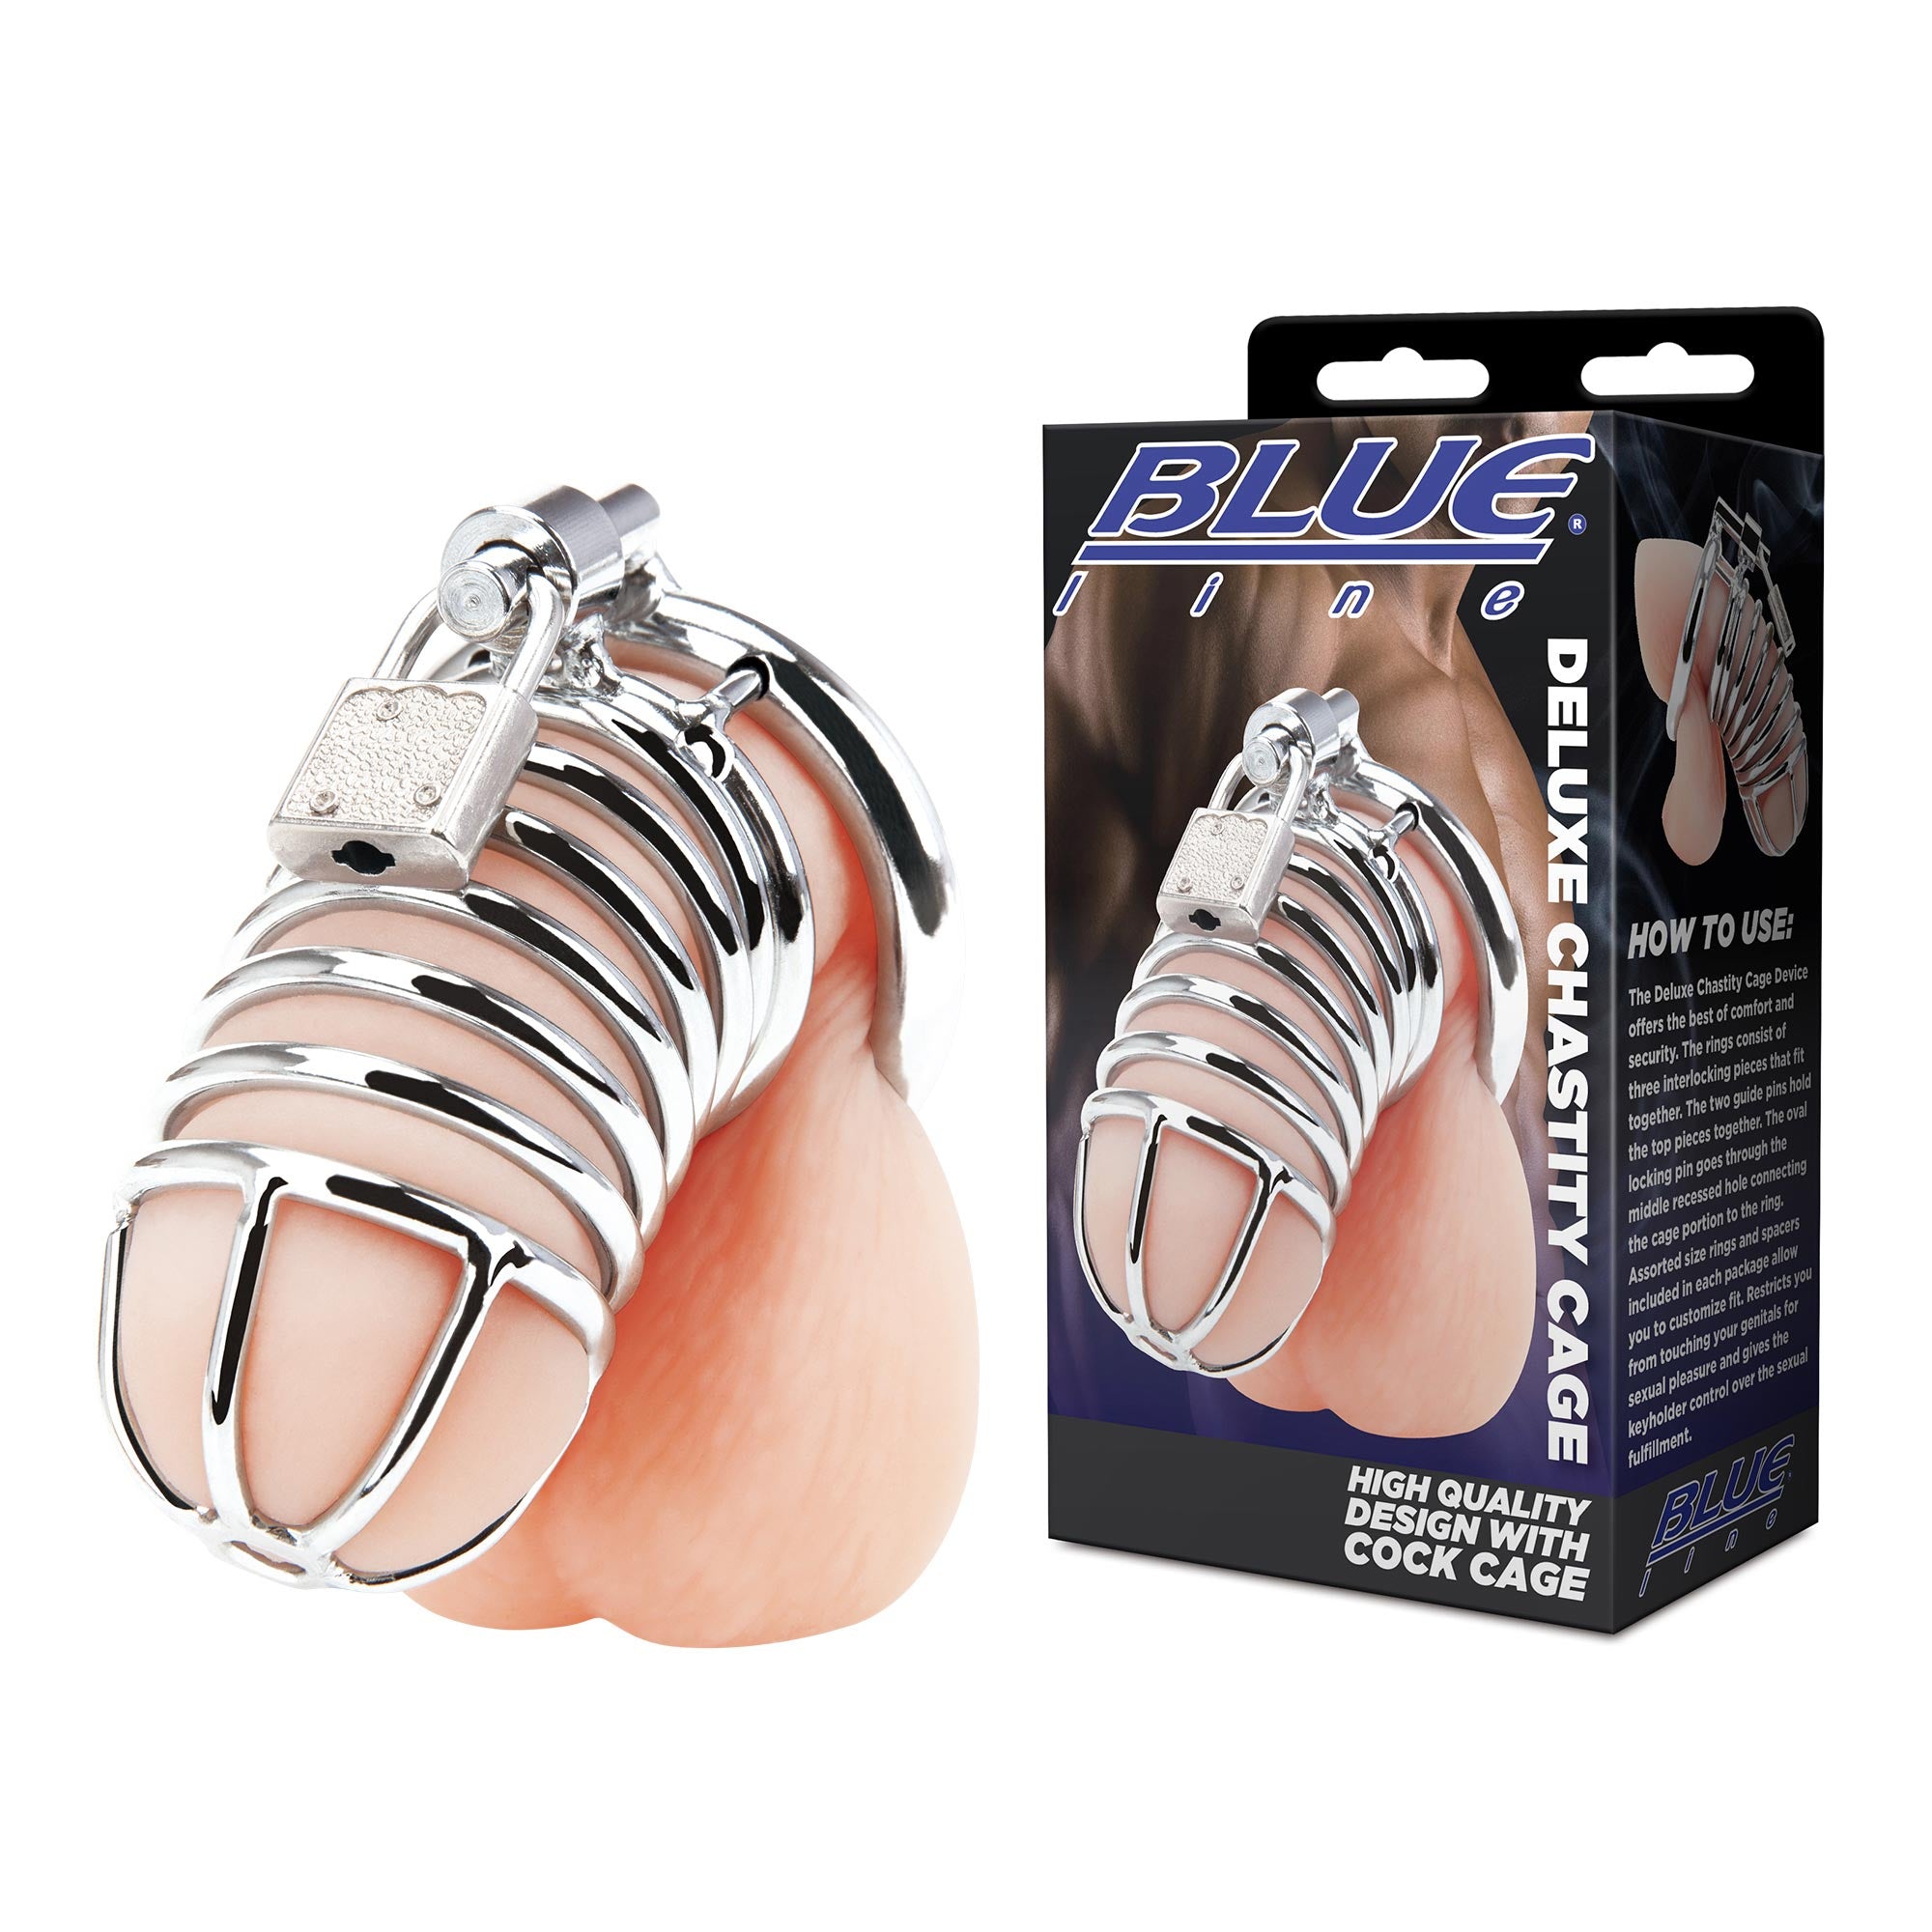 Packaging of Blue Line Men Deluxe Chastity Cock Cage with Lock (Stainless Steel) at glastoy.com